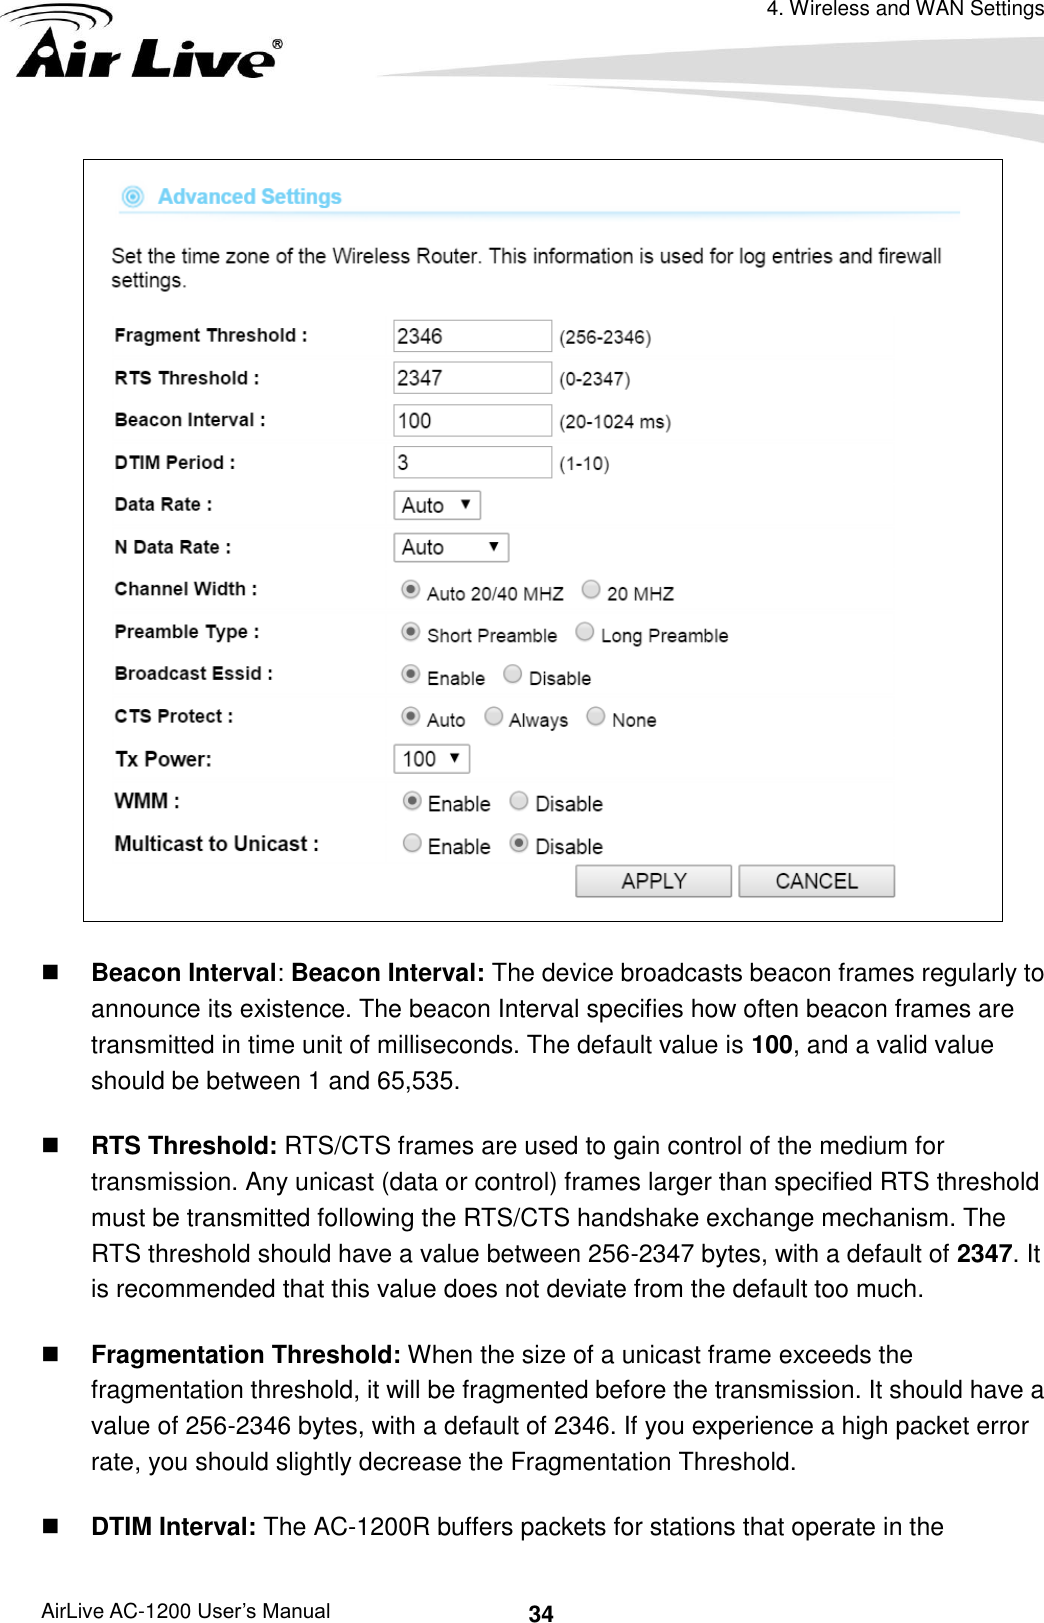 4. Wireless and WAN Settings AirLive AC-1200 User’s Manual 34   Beacon Interval: Beacon Interval: The device broadcasts beacon frames regularly to announce its existence. The beacon Interval specifies how often beacon frames are transmitted in time unit of milliseconds. The default value is 100, and a valid value should be between 1 and 65,535.    RTS Threshold: RTS/CTS frames are used to gain control of the medium for transmission. Any unicast (data or control) frames larger than specified RTS threshold must be transmitted following the RTS/CTS handshake exchange mechanism. The RTS threshold should have a value between 256-2347 bytes, with a default of 2347. It is recommended that this value does not deviate from the default too much.    Fragmentation Threshold: When the size of a unicast frame exceeds the fragmentation threshold, it will be fragmented before the transmission. It should have a value of 256-2346 bytes, with a default of 2346. If you experience a high packet error rate, you should slightly decrease the Fragmentation Threshold.    DTIM Interval: The AC-1200R buffers packets for stations that operate in the 